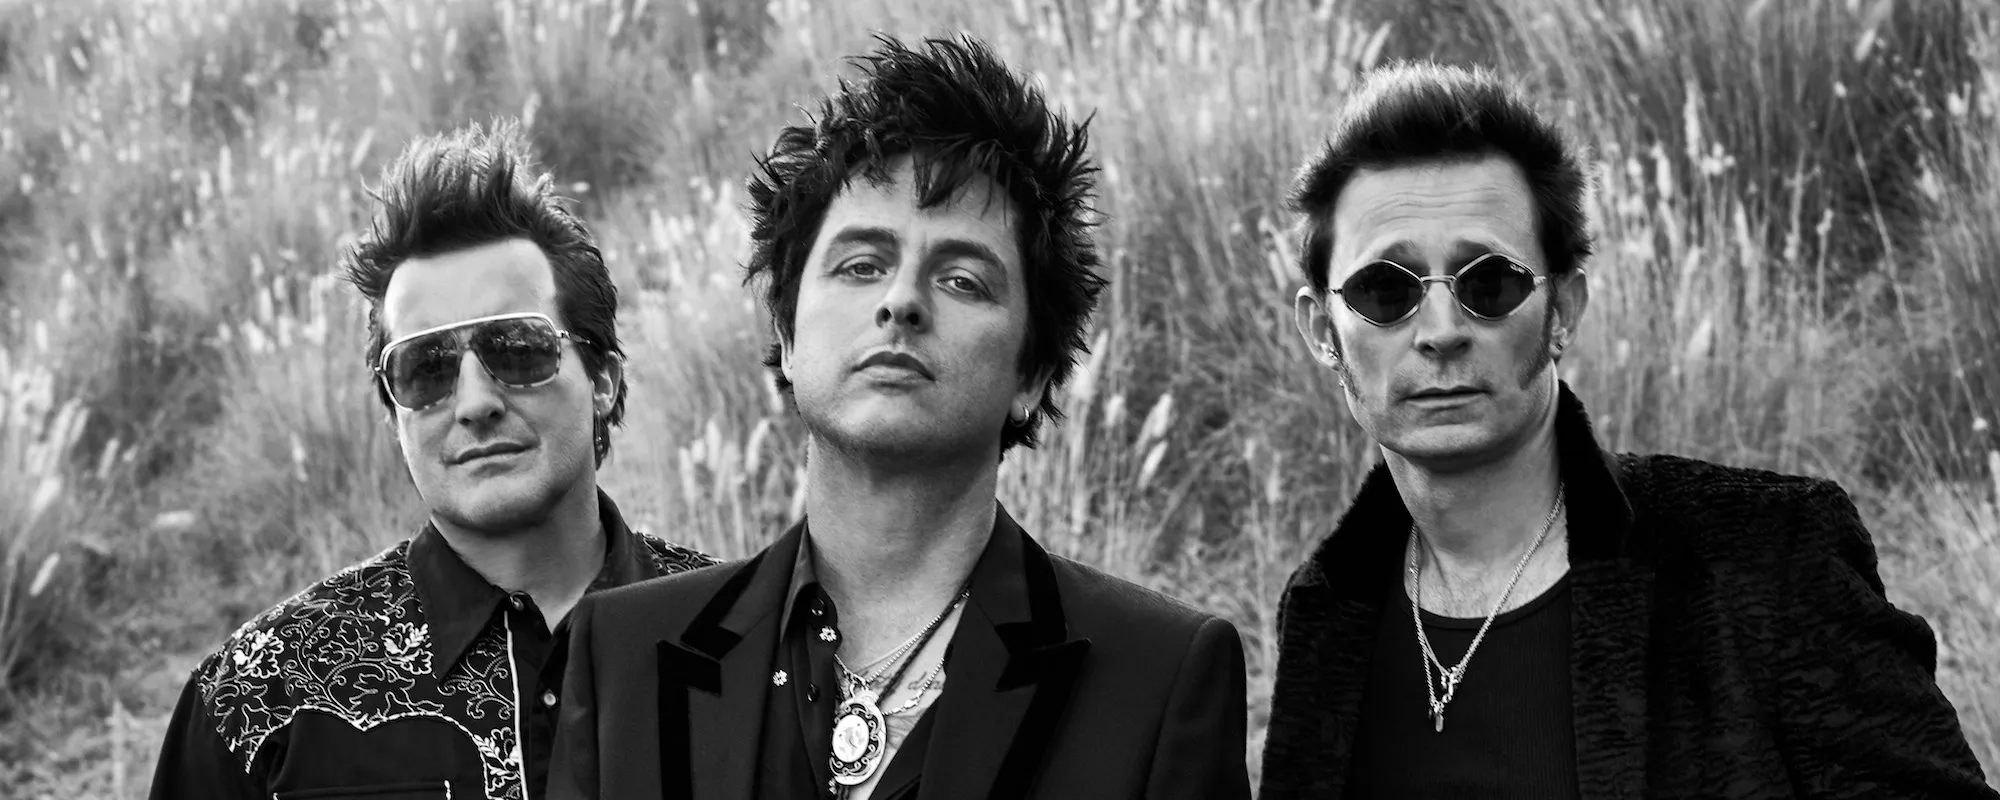 Green Day Sends “F*** You” Message to Texas Senator Ted Cruz During Concert